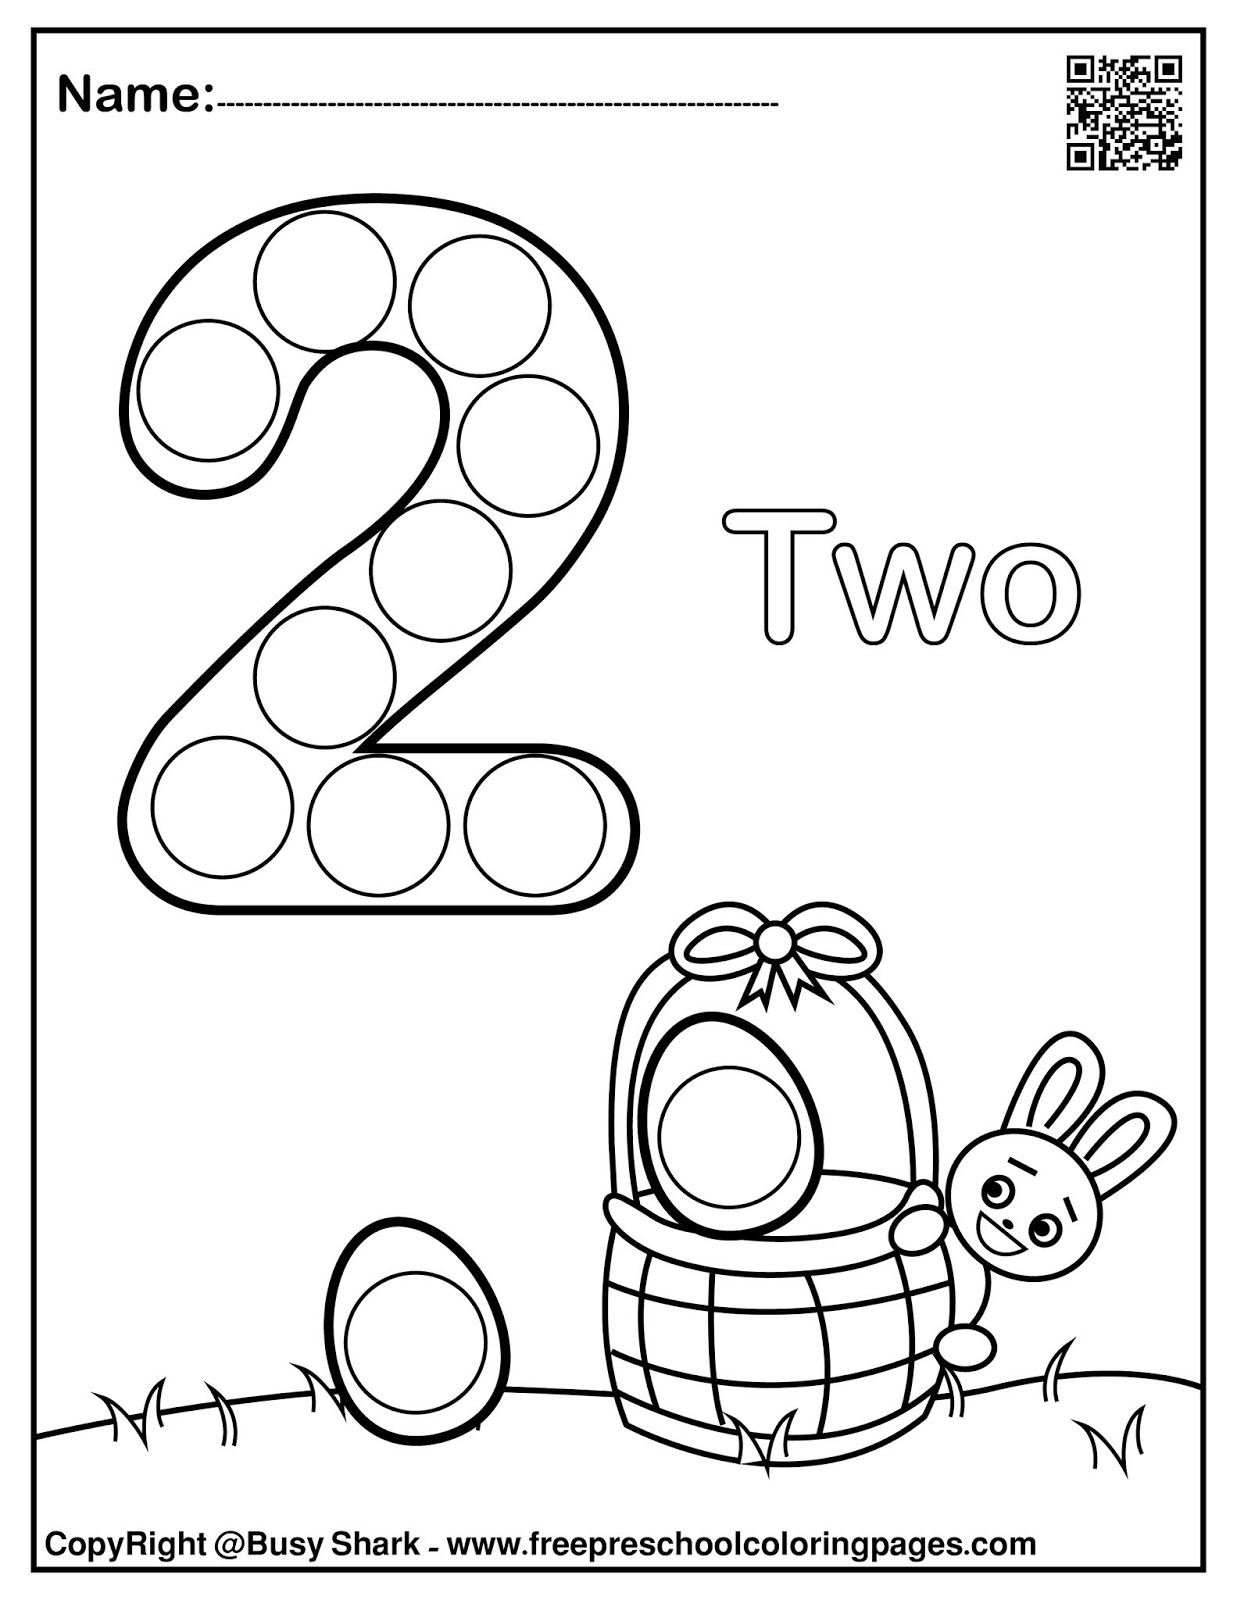 dot-to-dot-coloring-pages-christmas